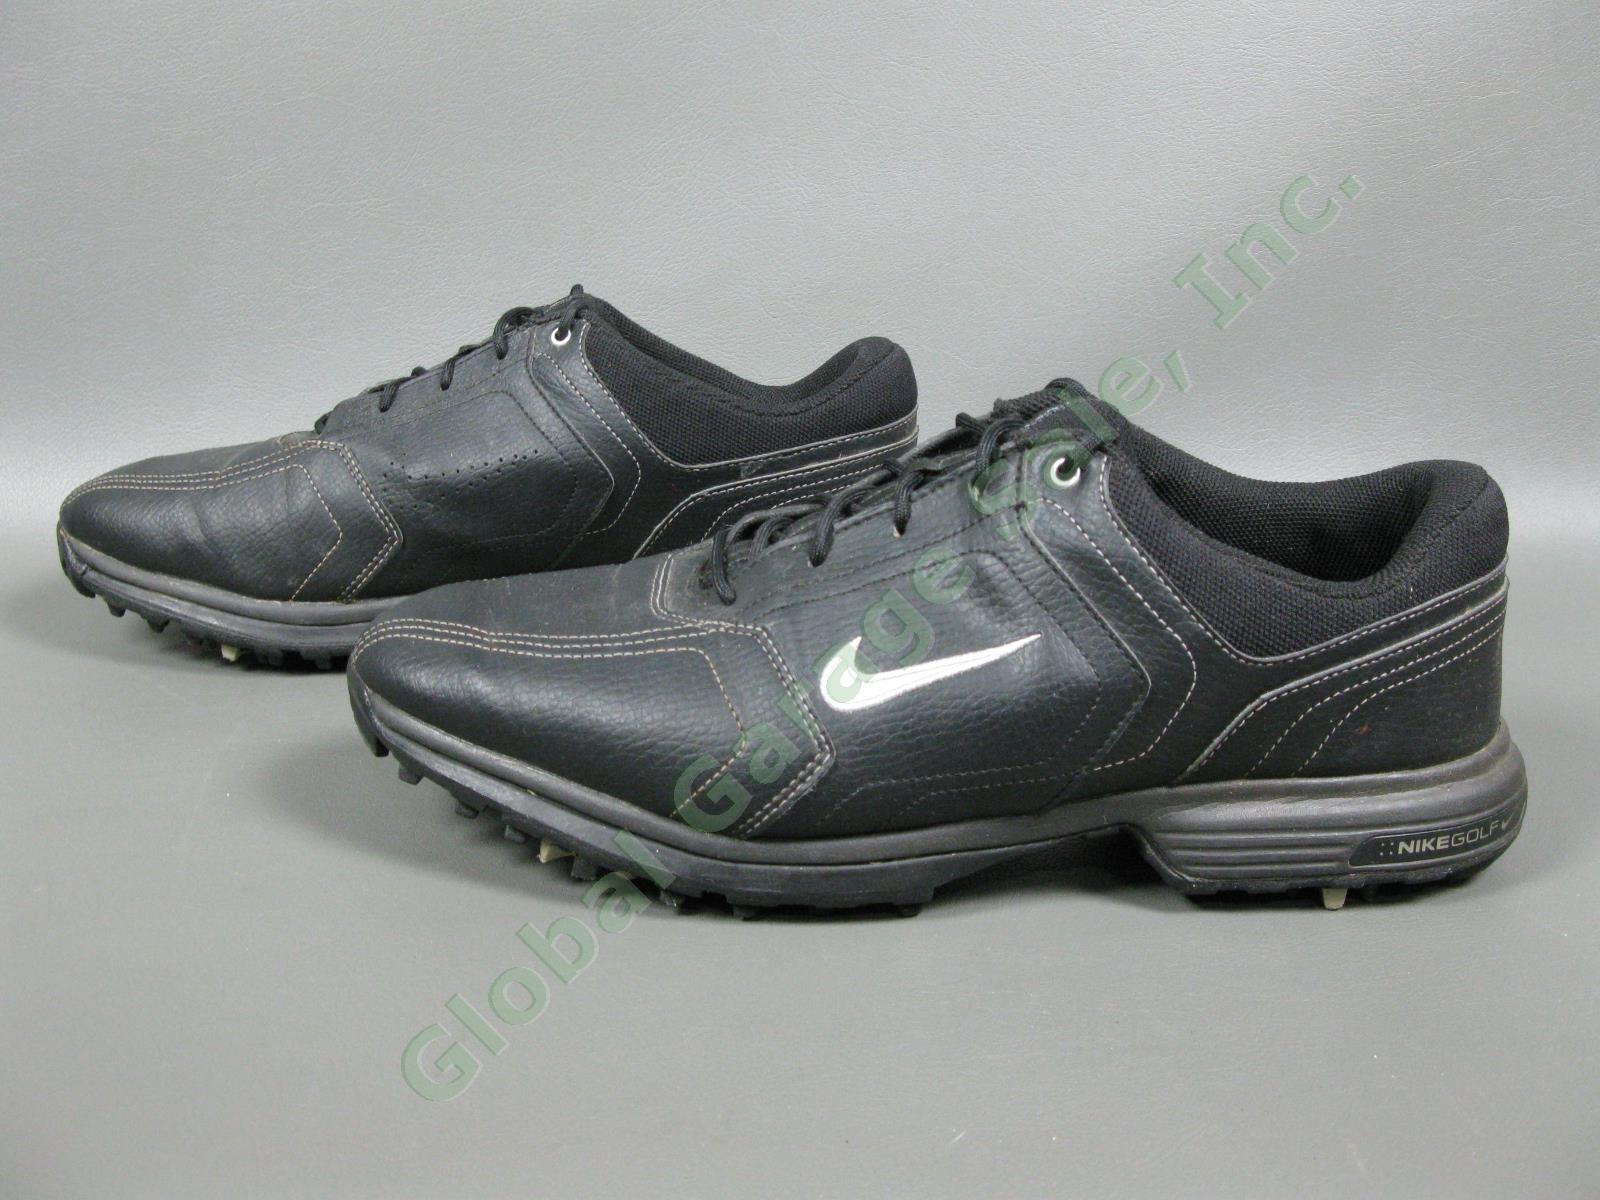 Nike Heritage Mens Leather Golf Shoe Pair Size 10 Black White Athletic Shoes 1